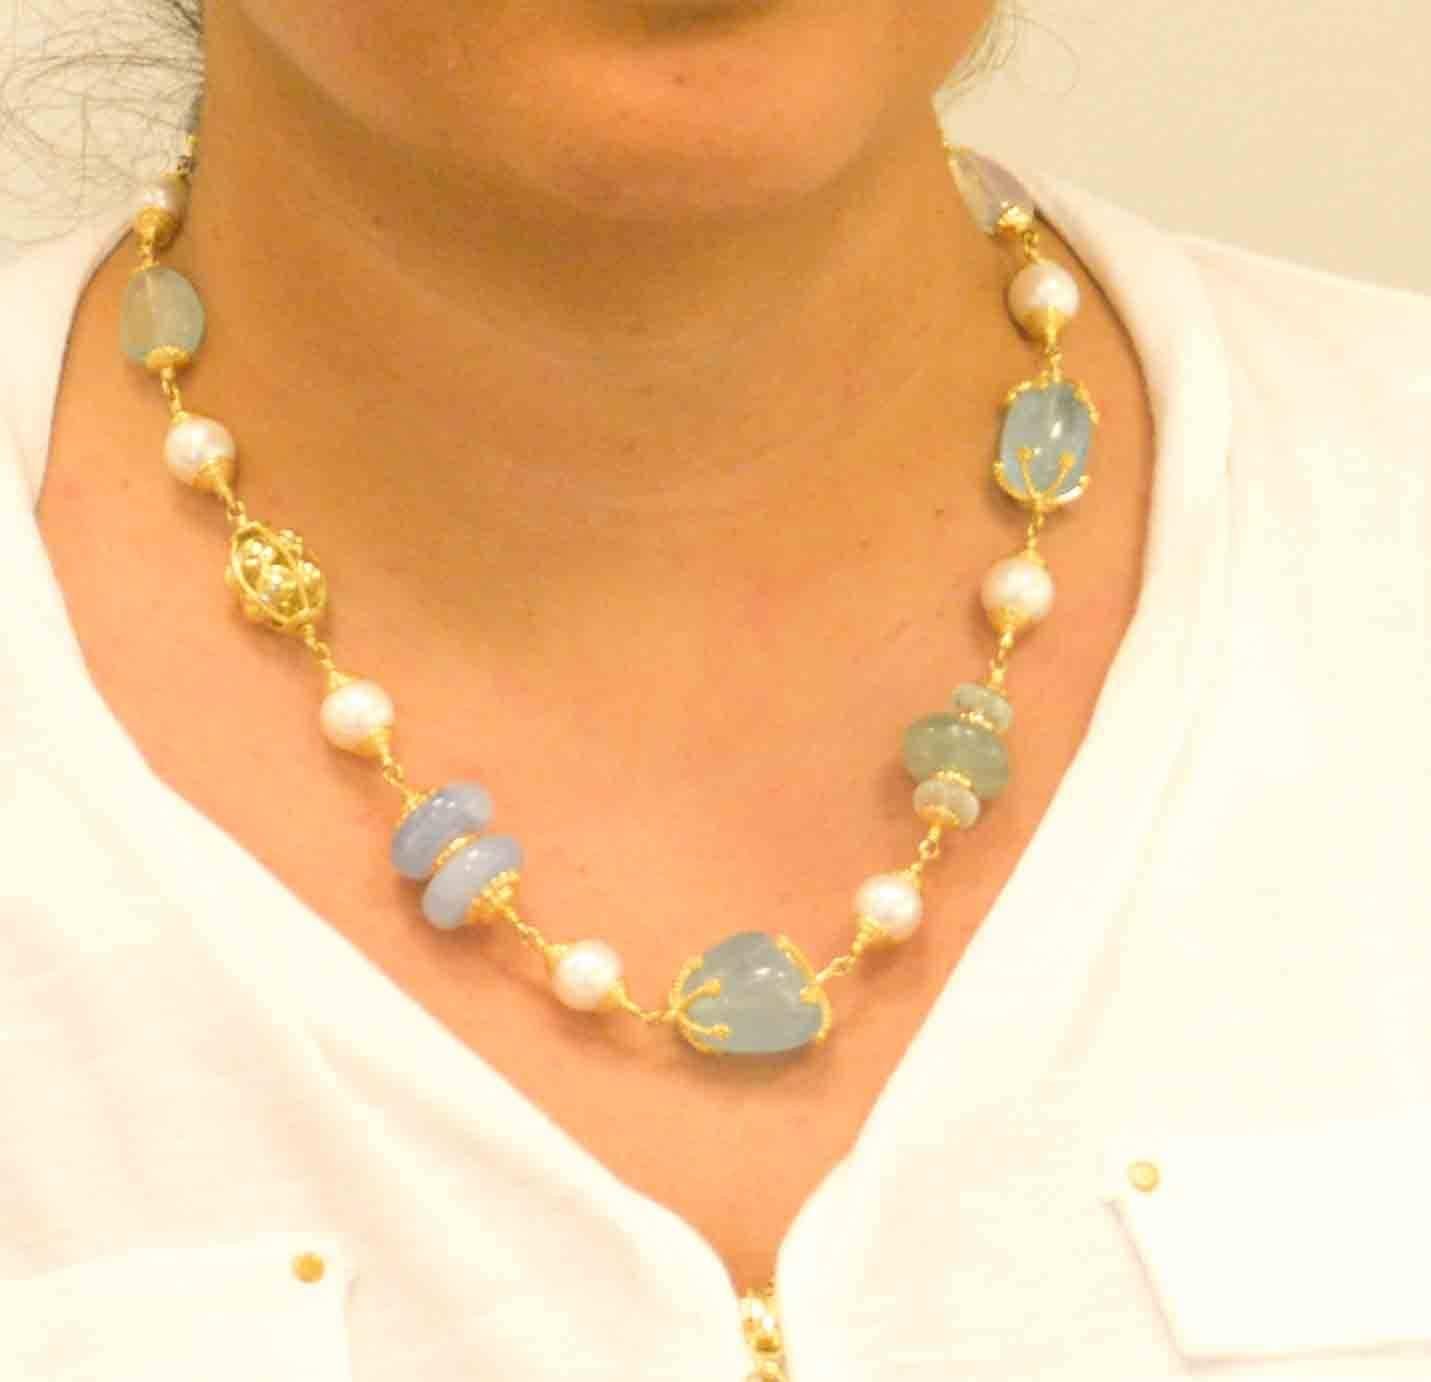 This amazing Seaman Schepps necklace is constructed of 18kt yellow gold and features a variety of semi precious gemstones.  These gemstones are selected in the typical Seaman Schepps character, using stones of amazing color and contrast.  The